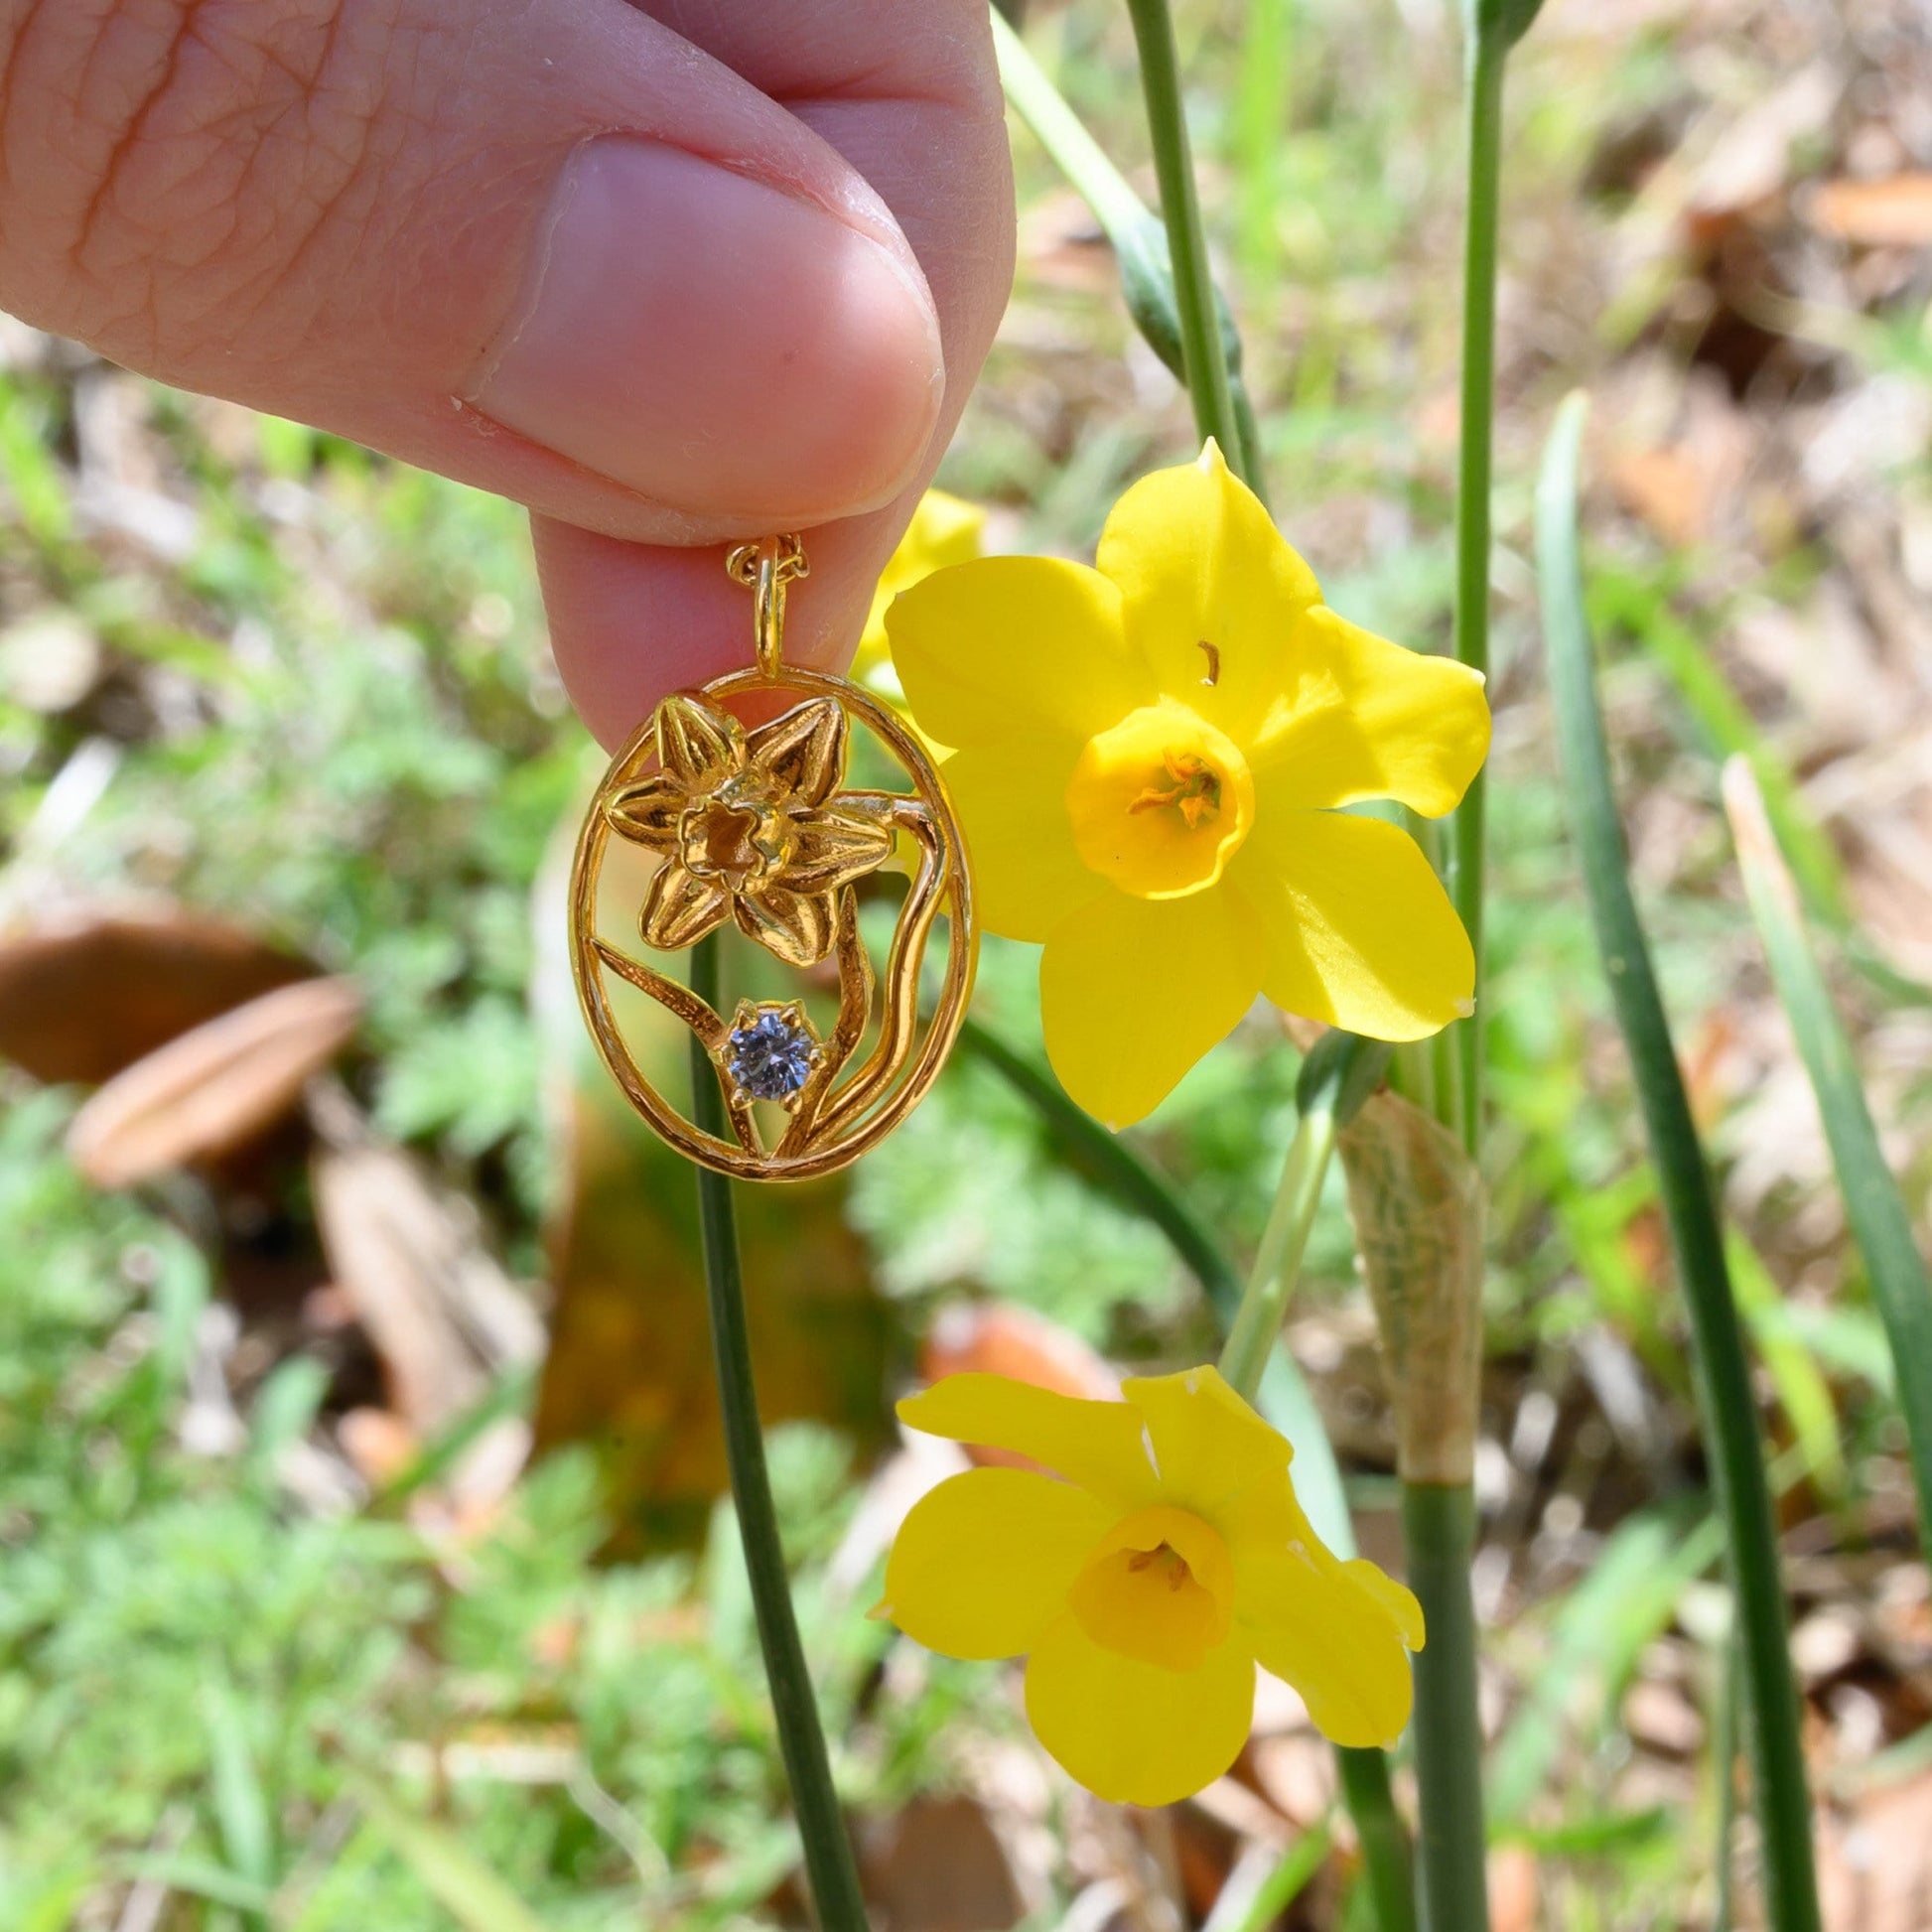 Daffodil Flower Necklace - Personalized Jewelry - September Birth Flower Gift, 14K Gold Plate with a Beaded Gold Filled chain